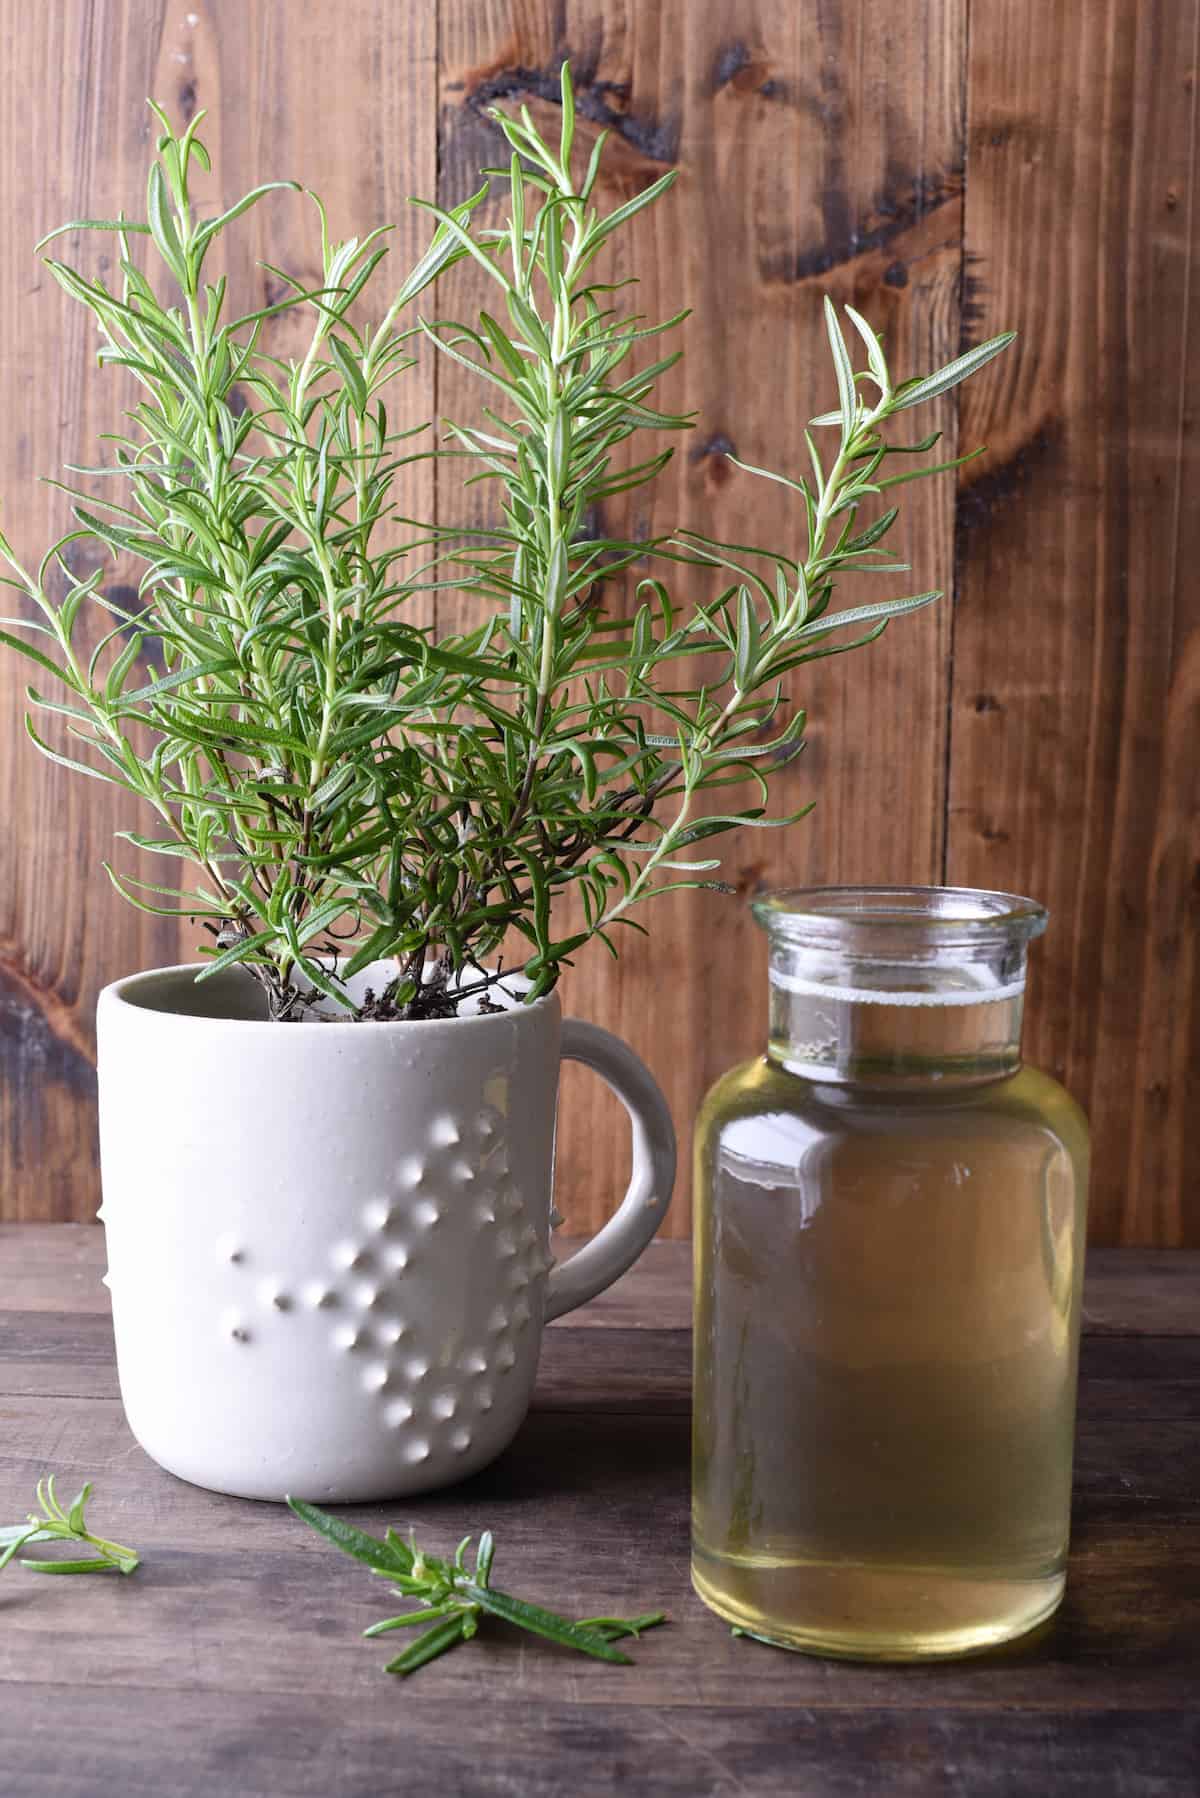 Small bottle of rosemary simple syrup and rosemary plant against wooden backdrop.